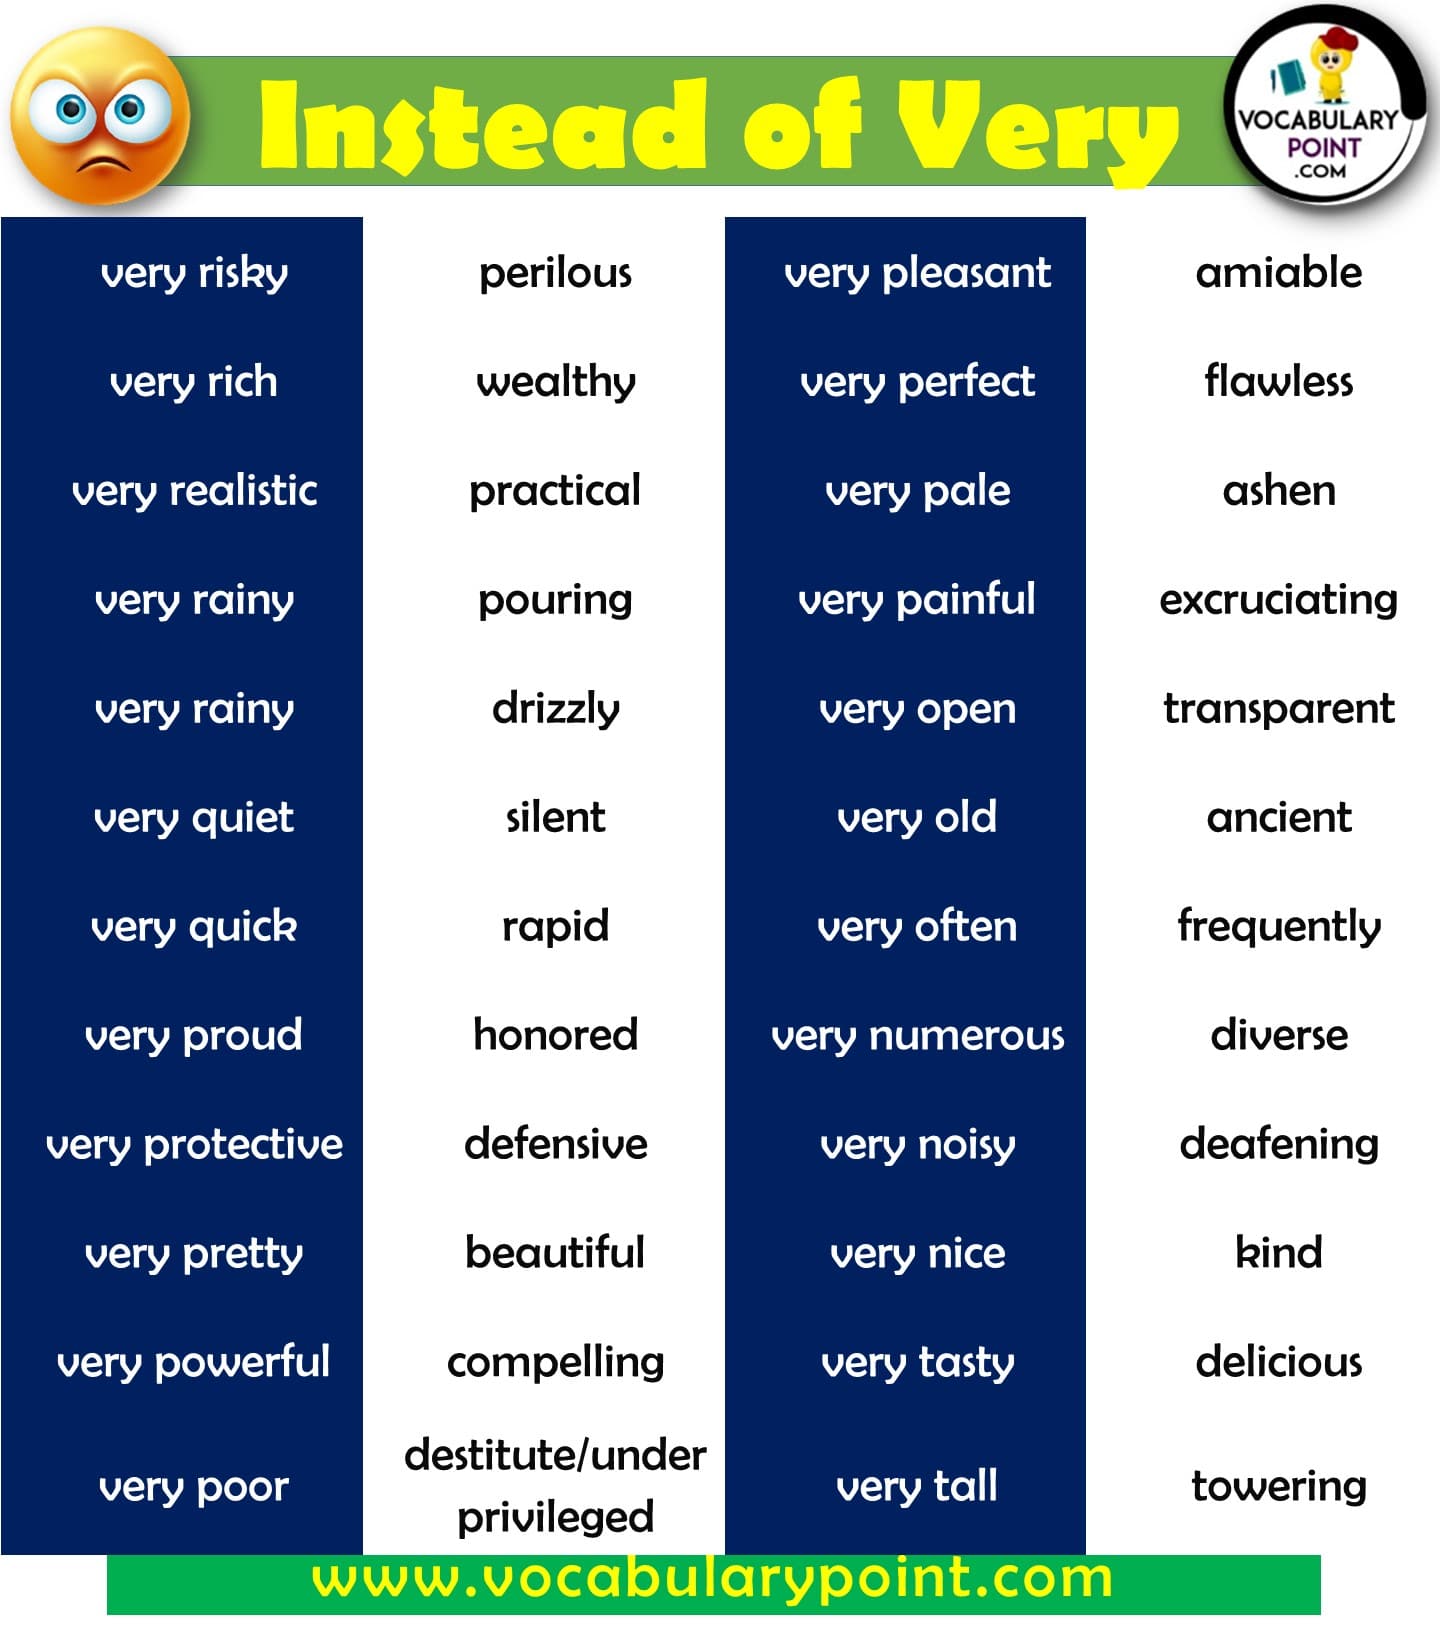 words to use instead of very